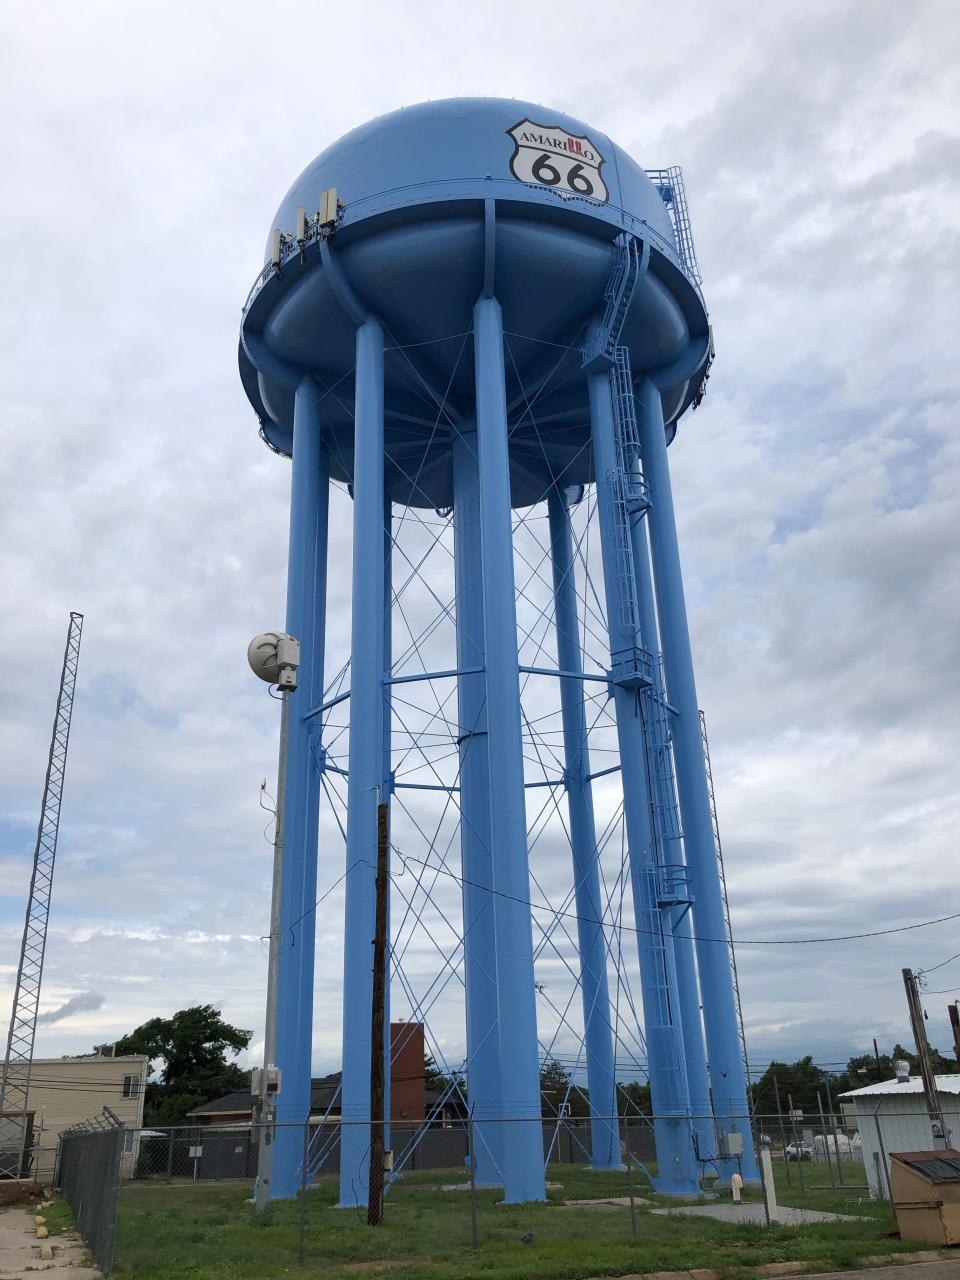 The water tower with its Route 66 logo beckons visitors to the area.